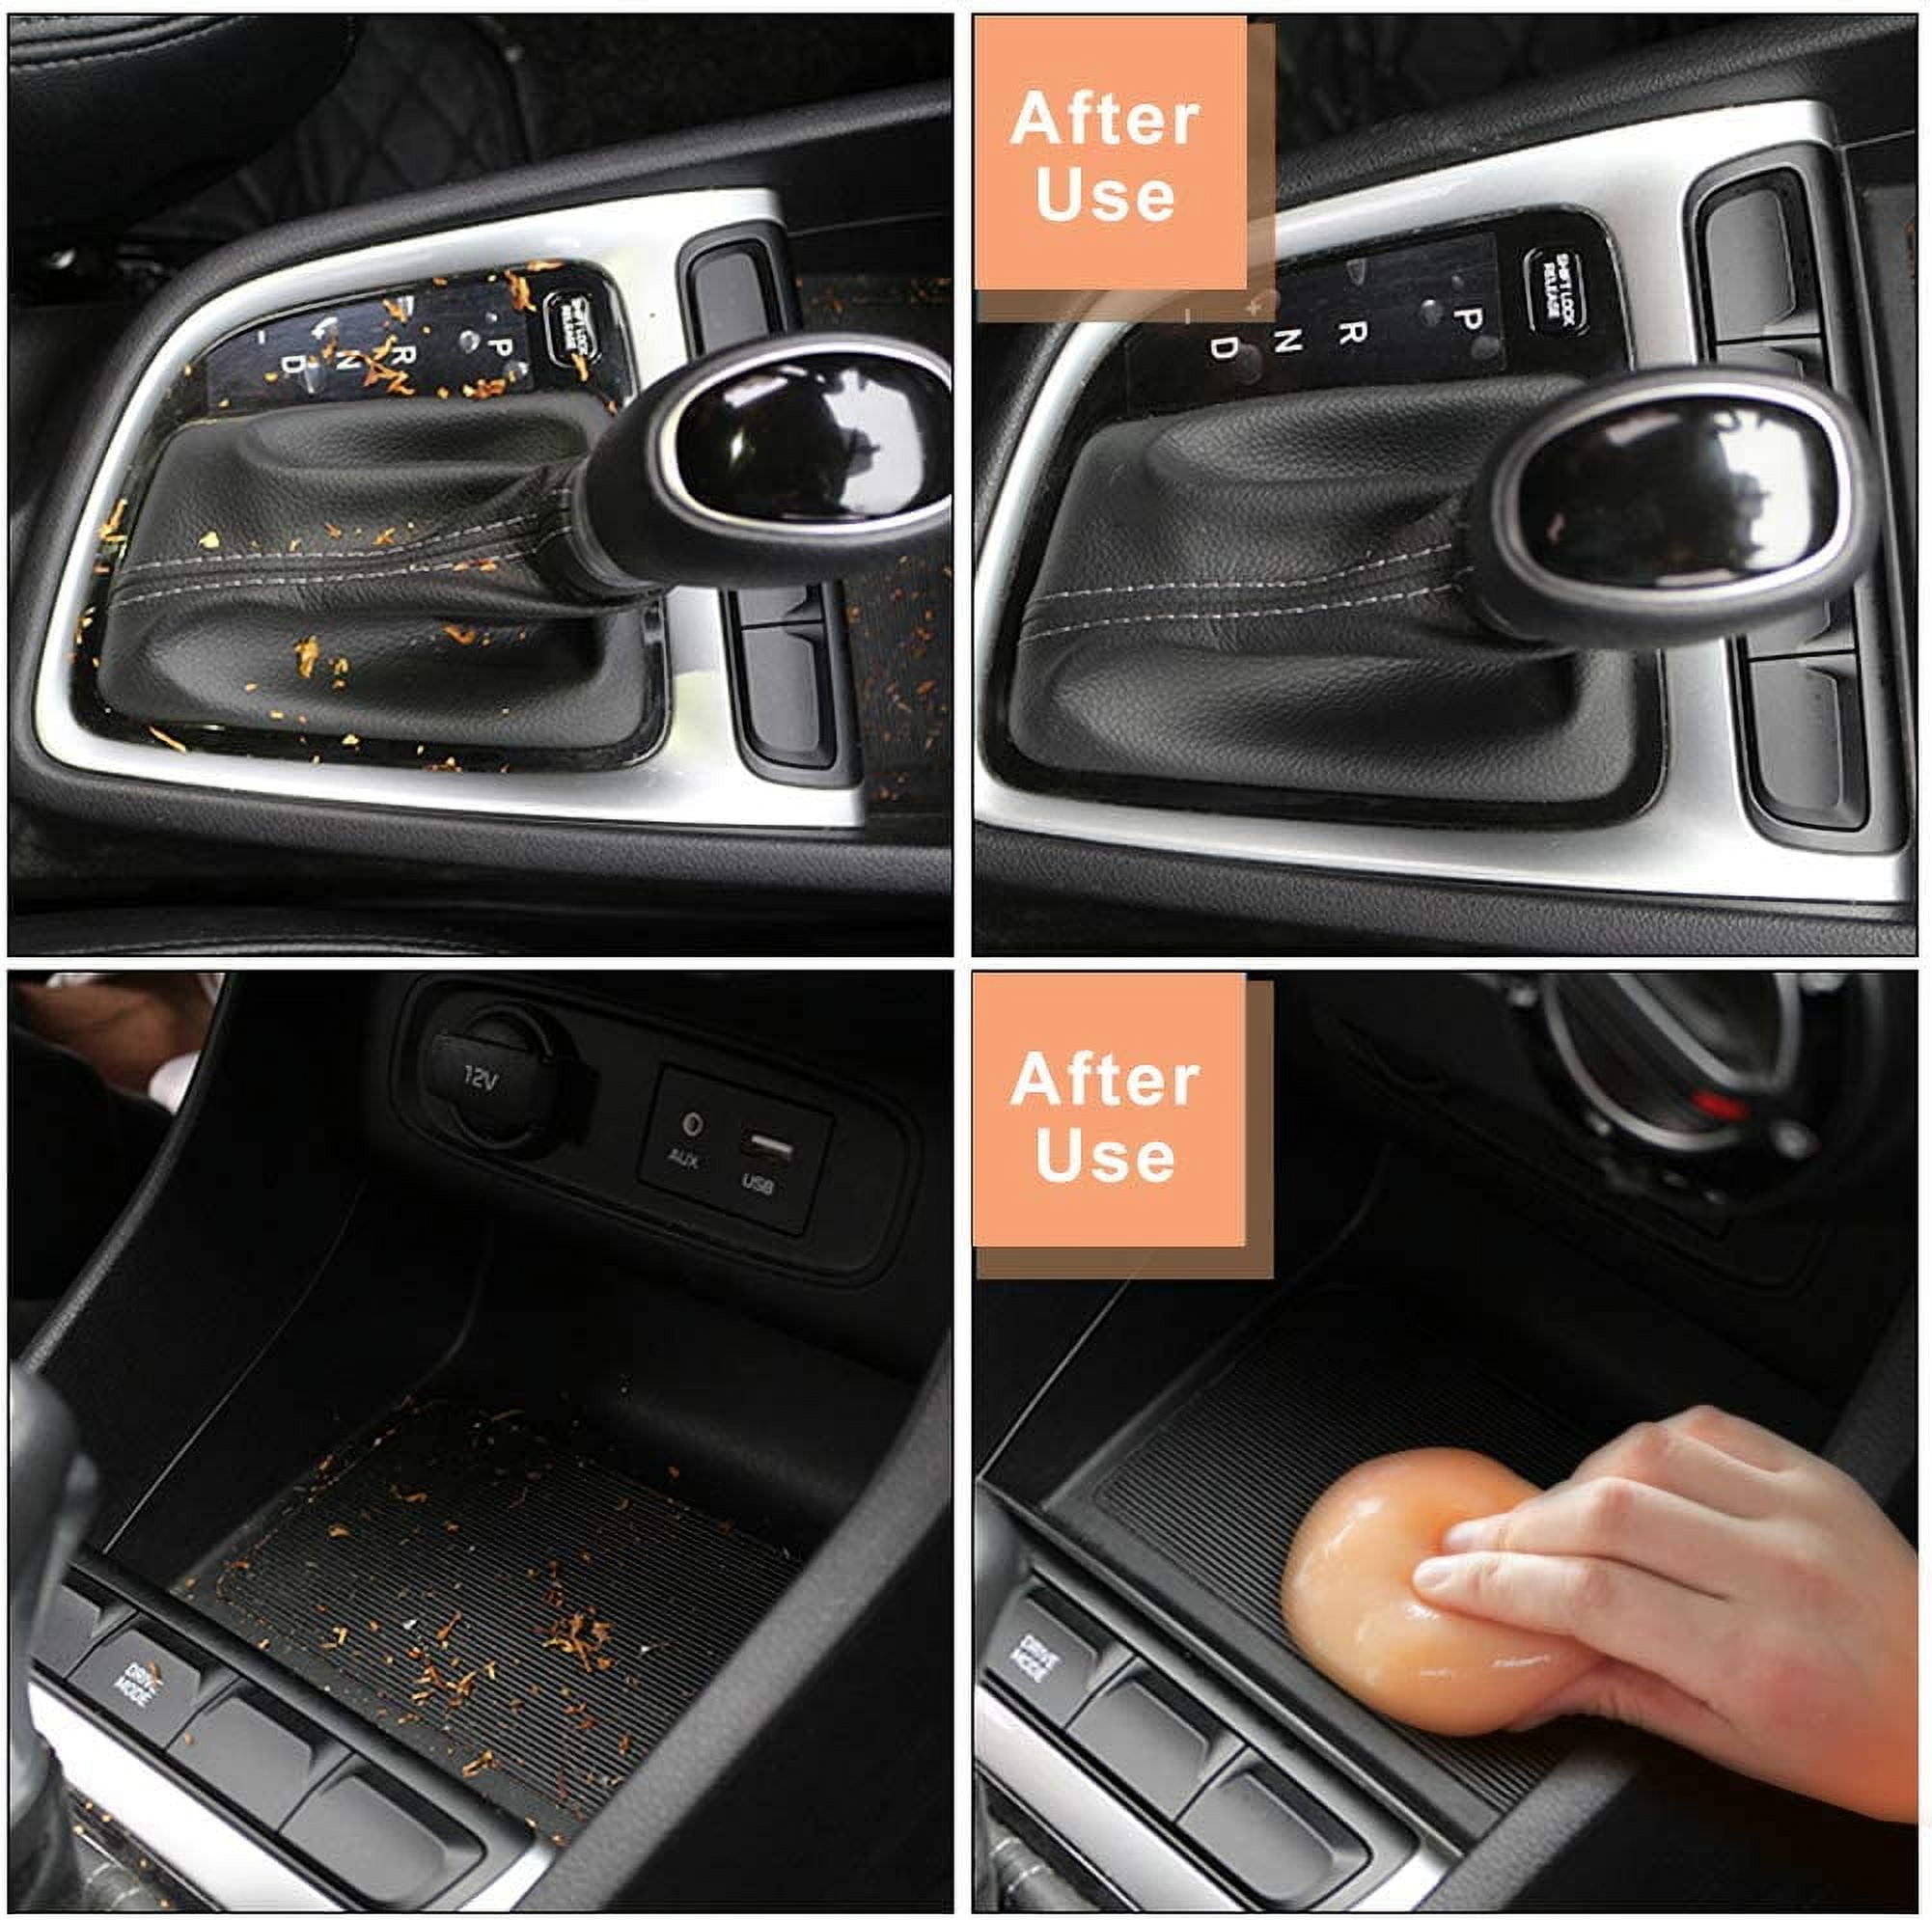 TICARVE Cleaning Gel for Car Cleaning Kit Detailing Putty Auto Cleaning  Putty Detailing Gel Detail Tools Car Interior Cleaner Cleaning Slime Car  Vent